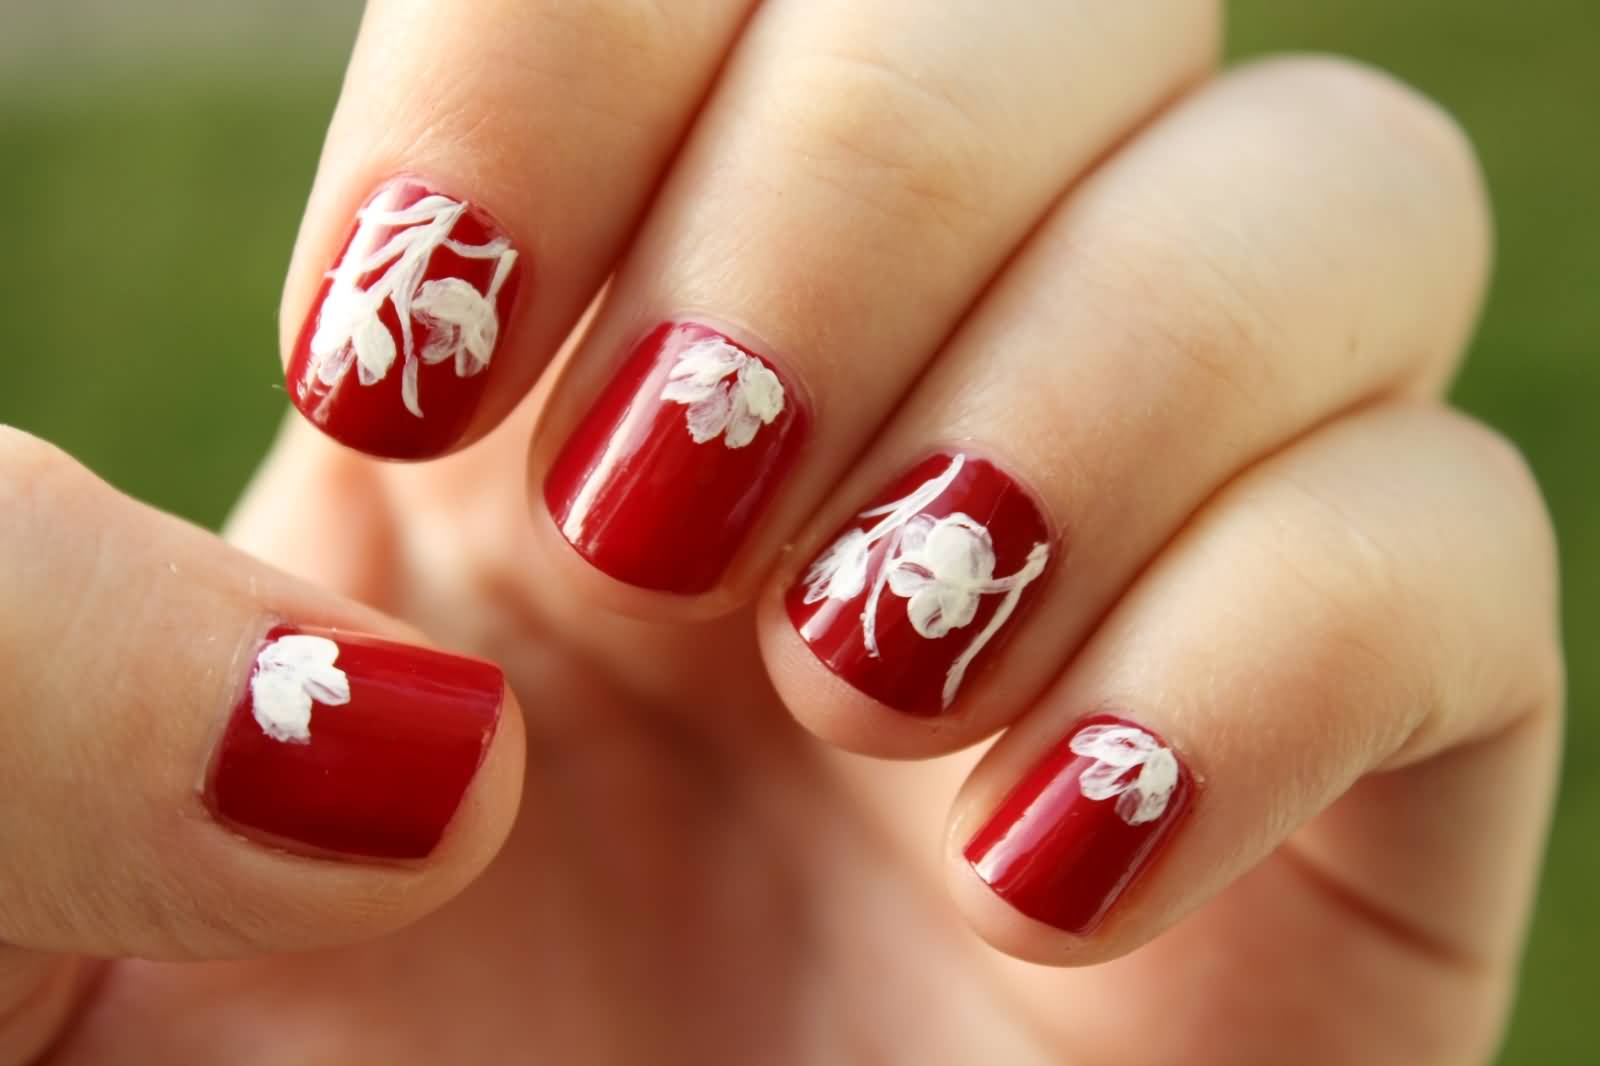 Red Short Nails With White Floral Design Nail Art